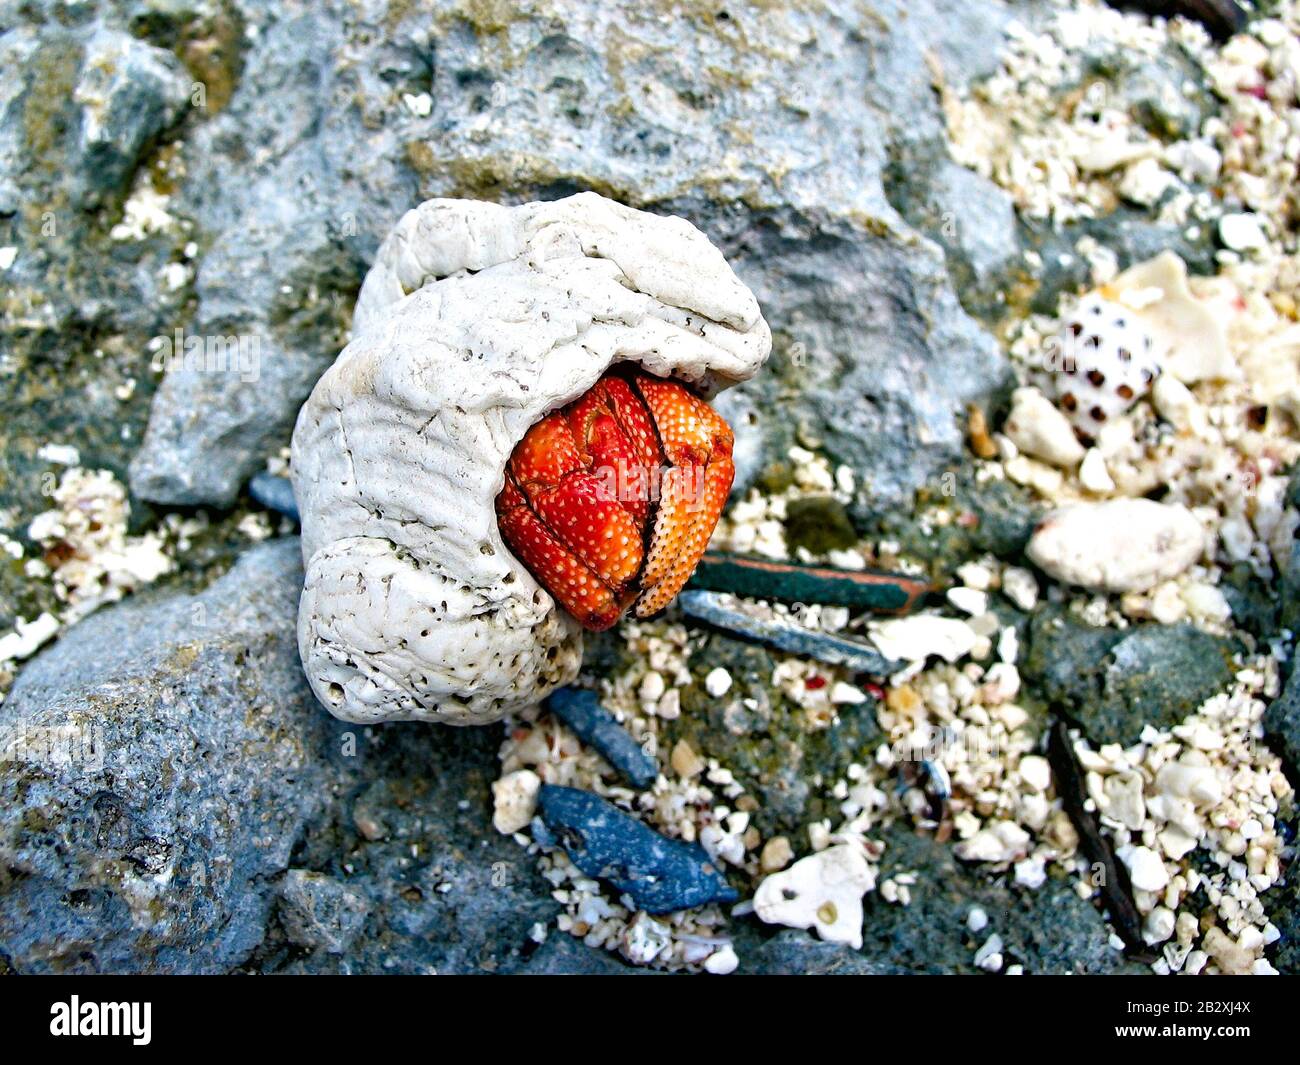 Hermit crab (Paguroidea) in a shell, Cocos Keeling Islands, Indian Ocean, Australia. Stock Photo